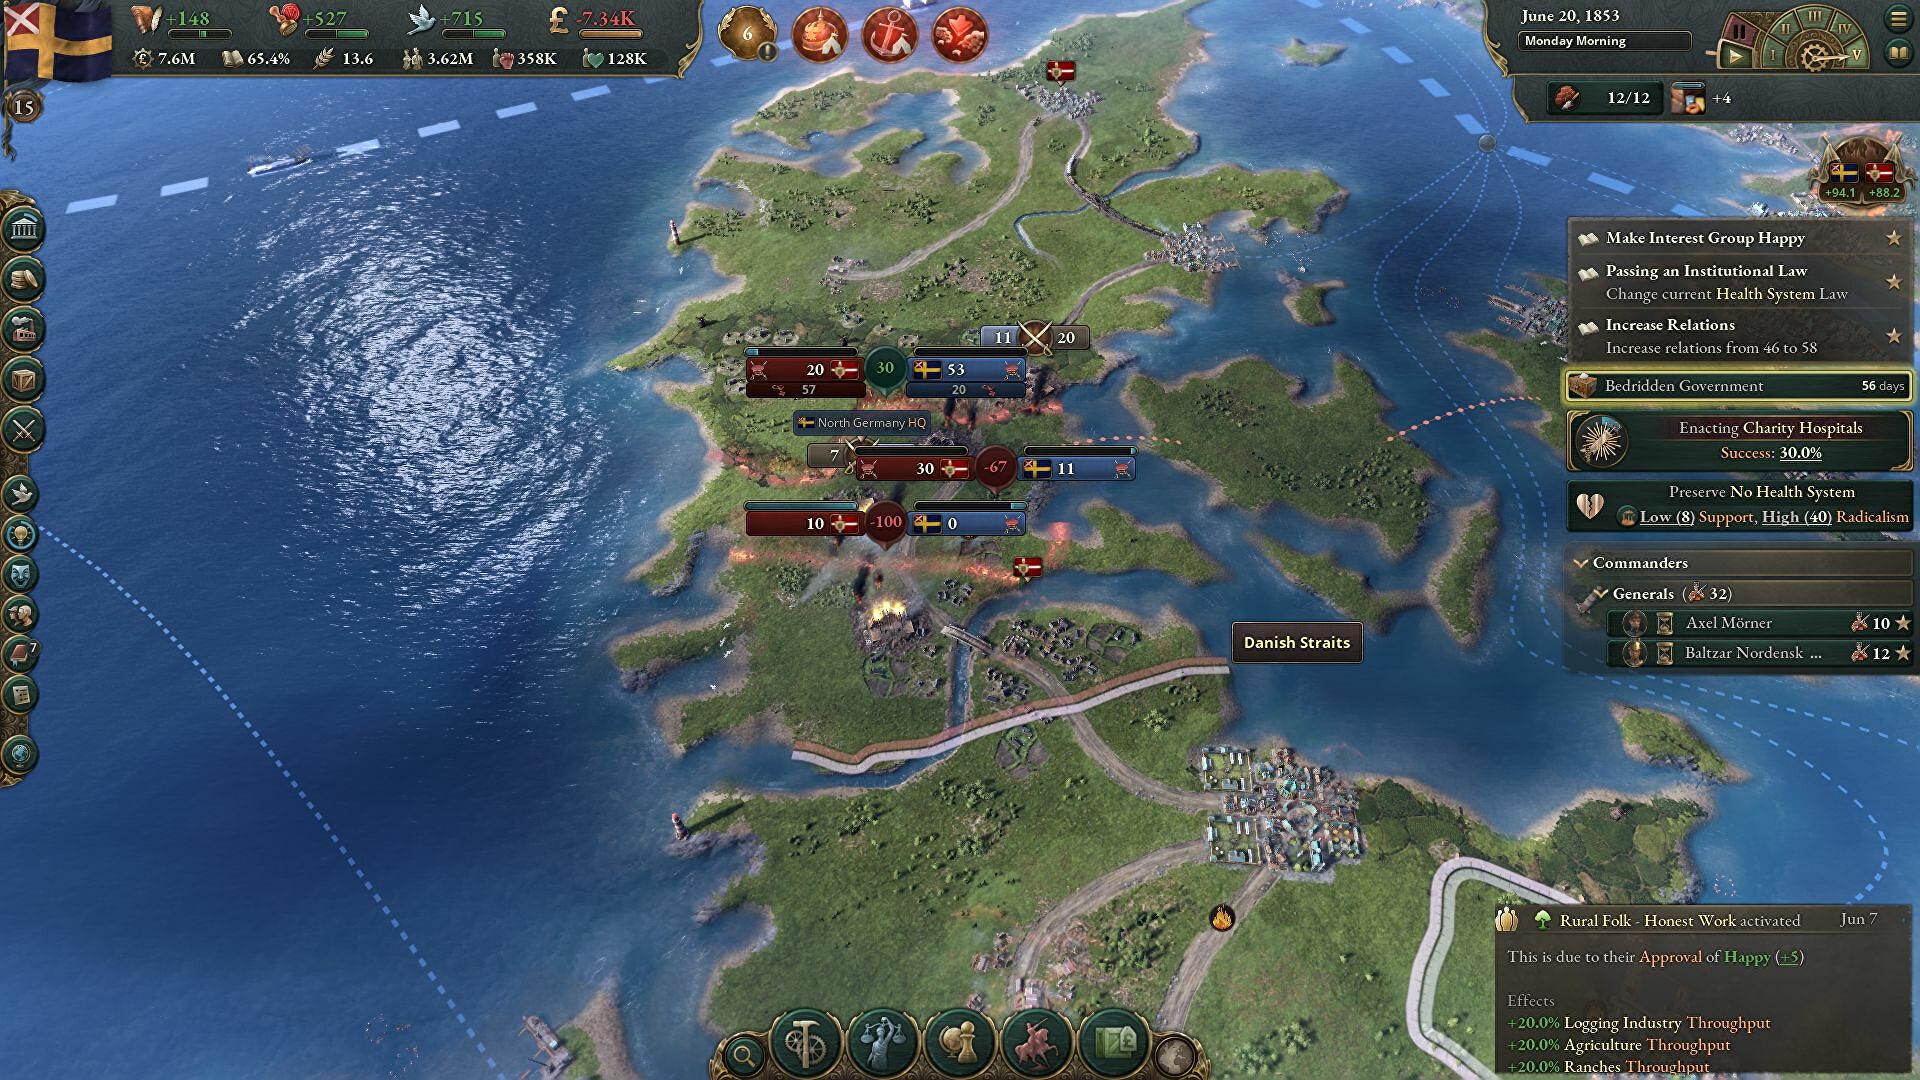 Paradox’s next grand strategy simulation will launch in October